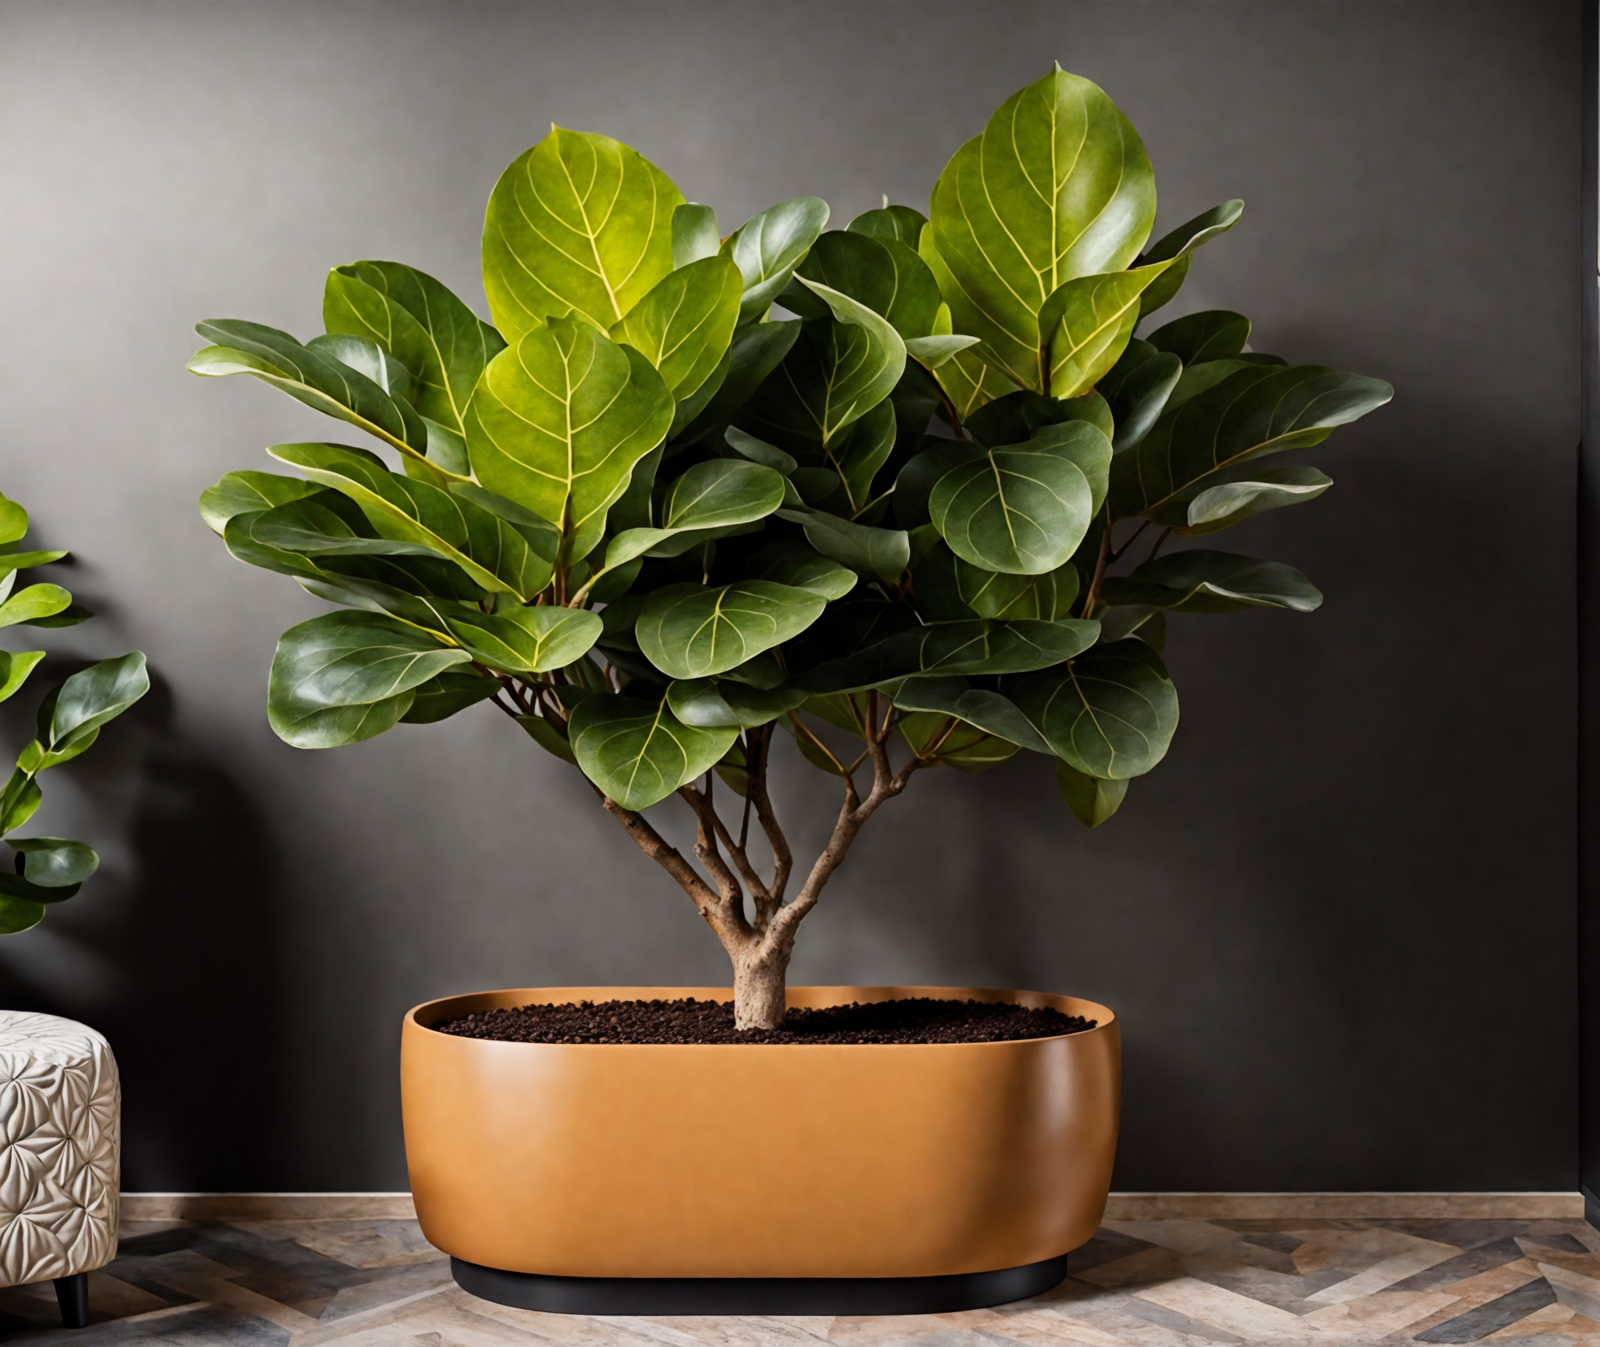 Two Ficus lyrata in brown vases on a wooden table, with clear lighting and a dark background.